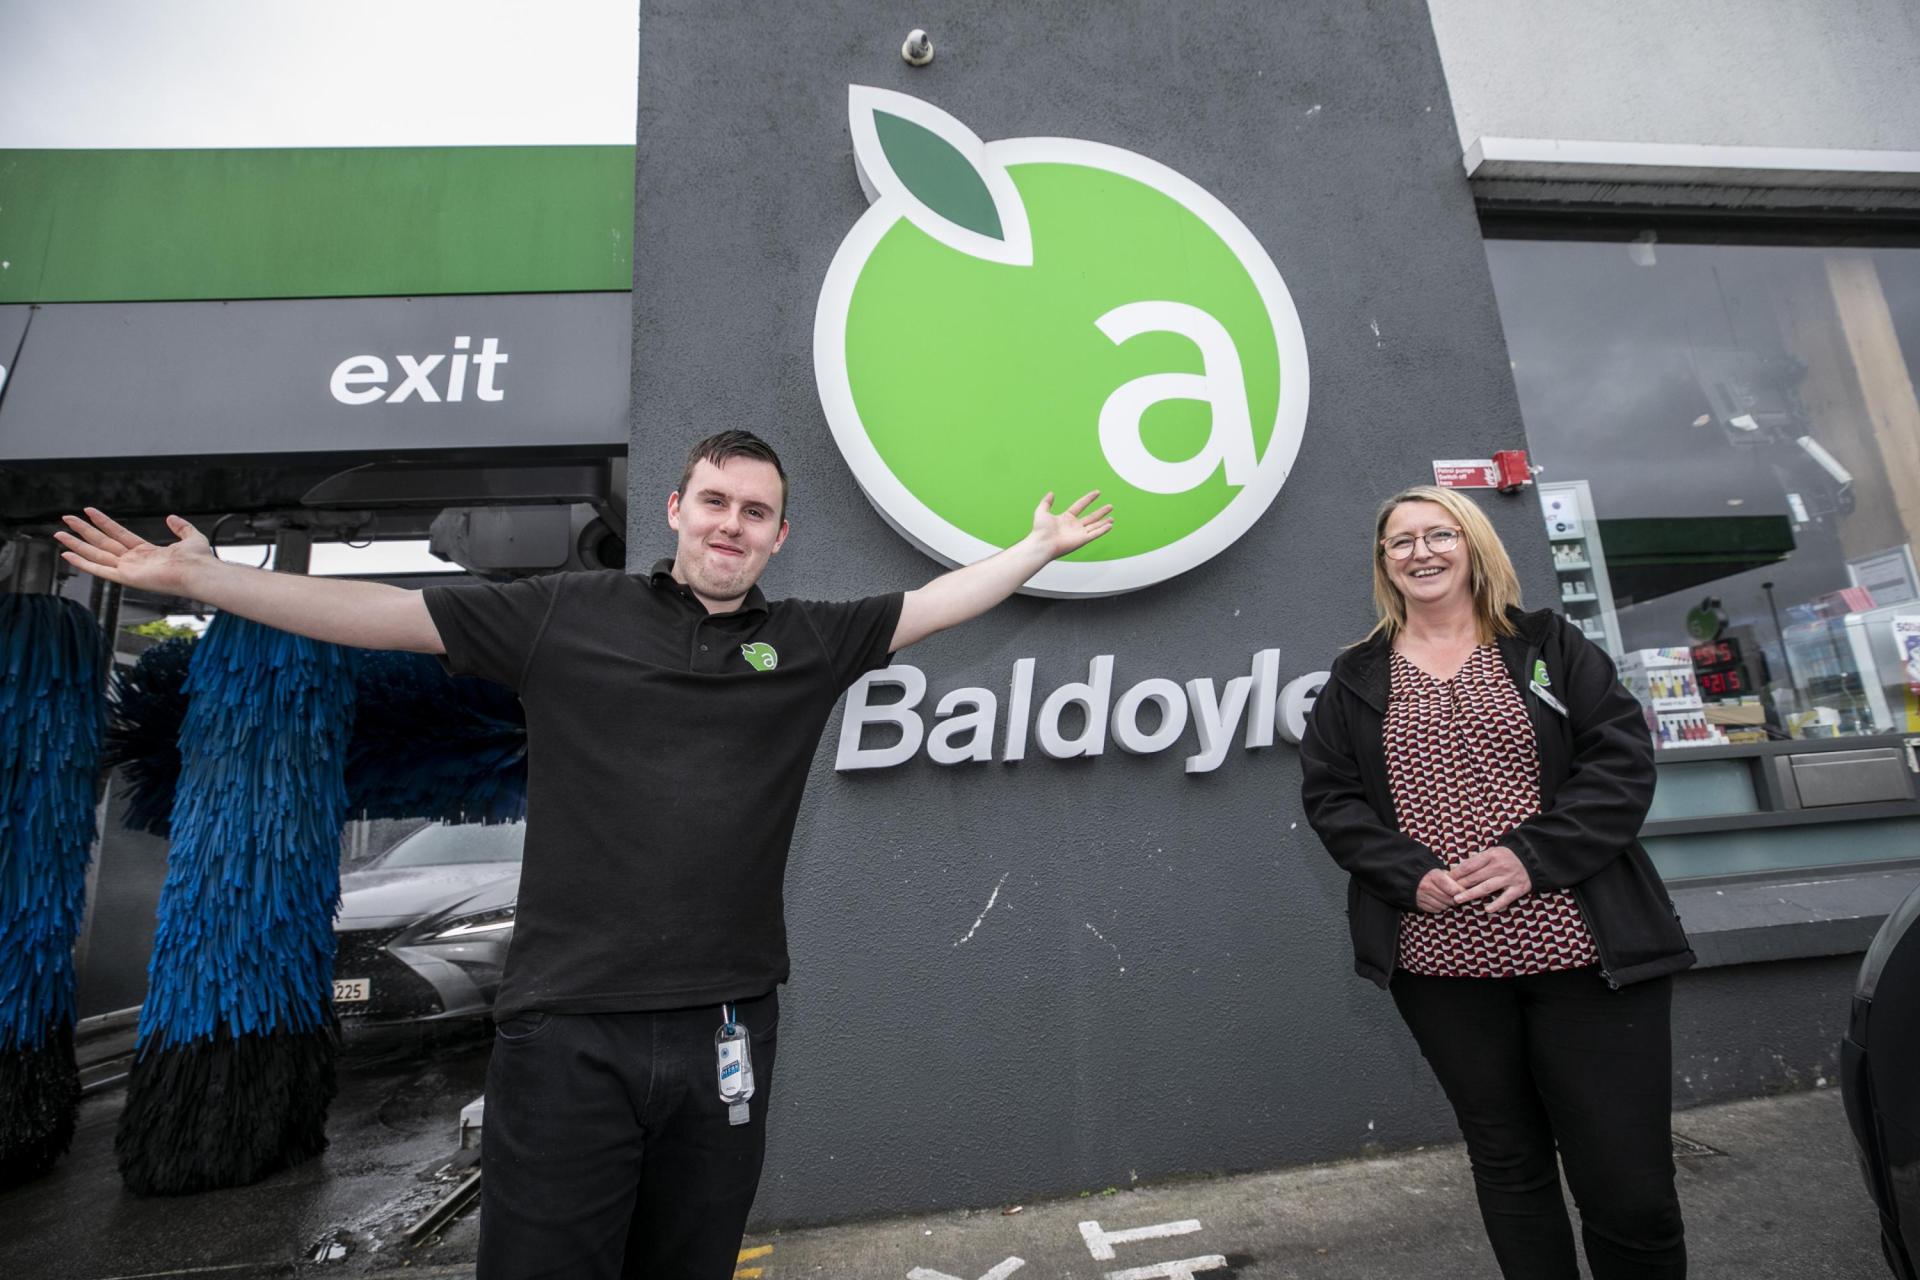 DCU Ability student Luke Kelly with manager Colette Murphy in Applegreen, Baldoyle.